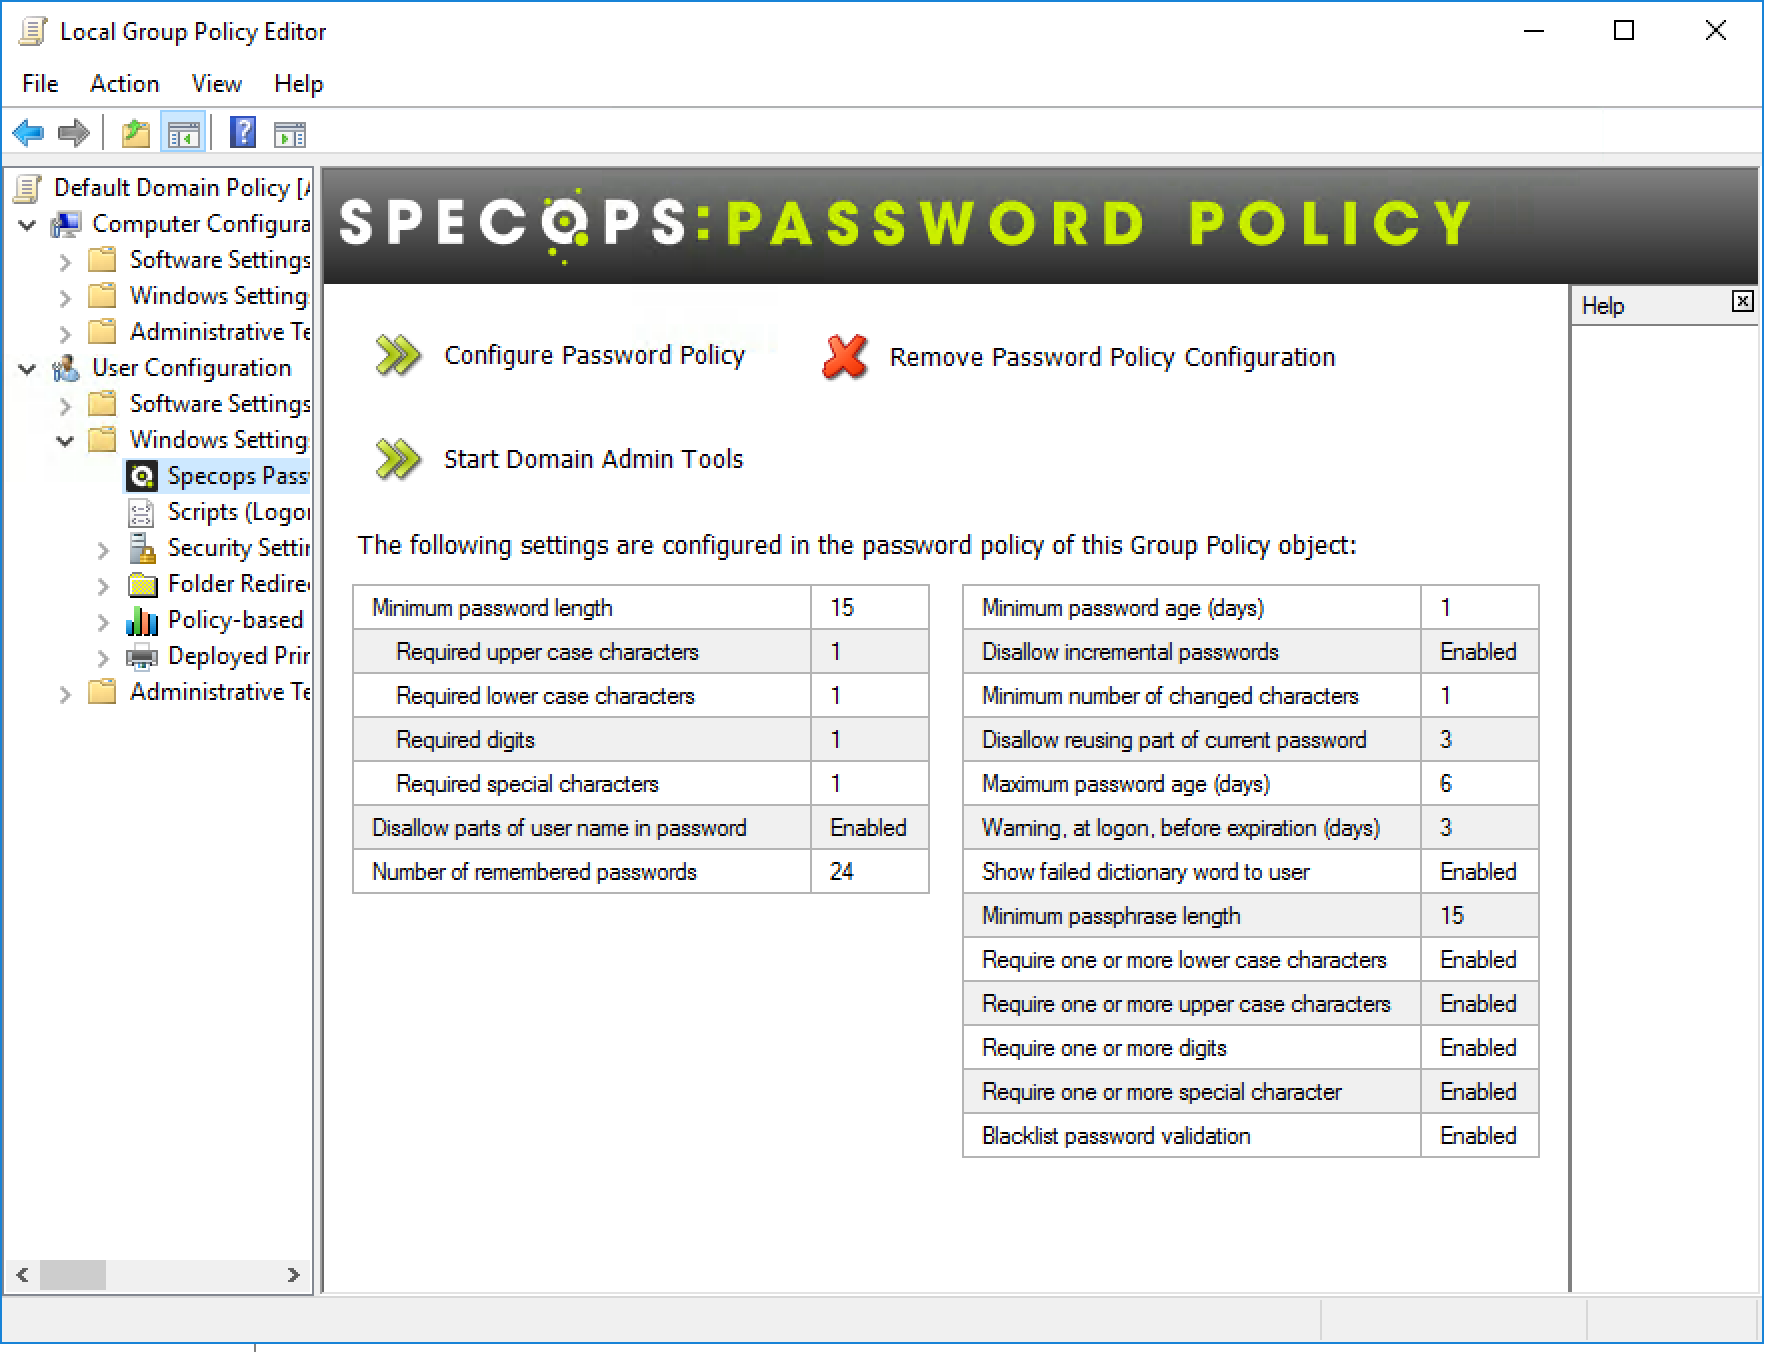 Specops Password Policy - Gestionnaire intégré au Group Policy Editor